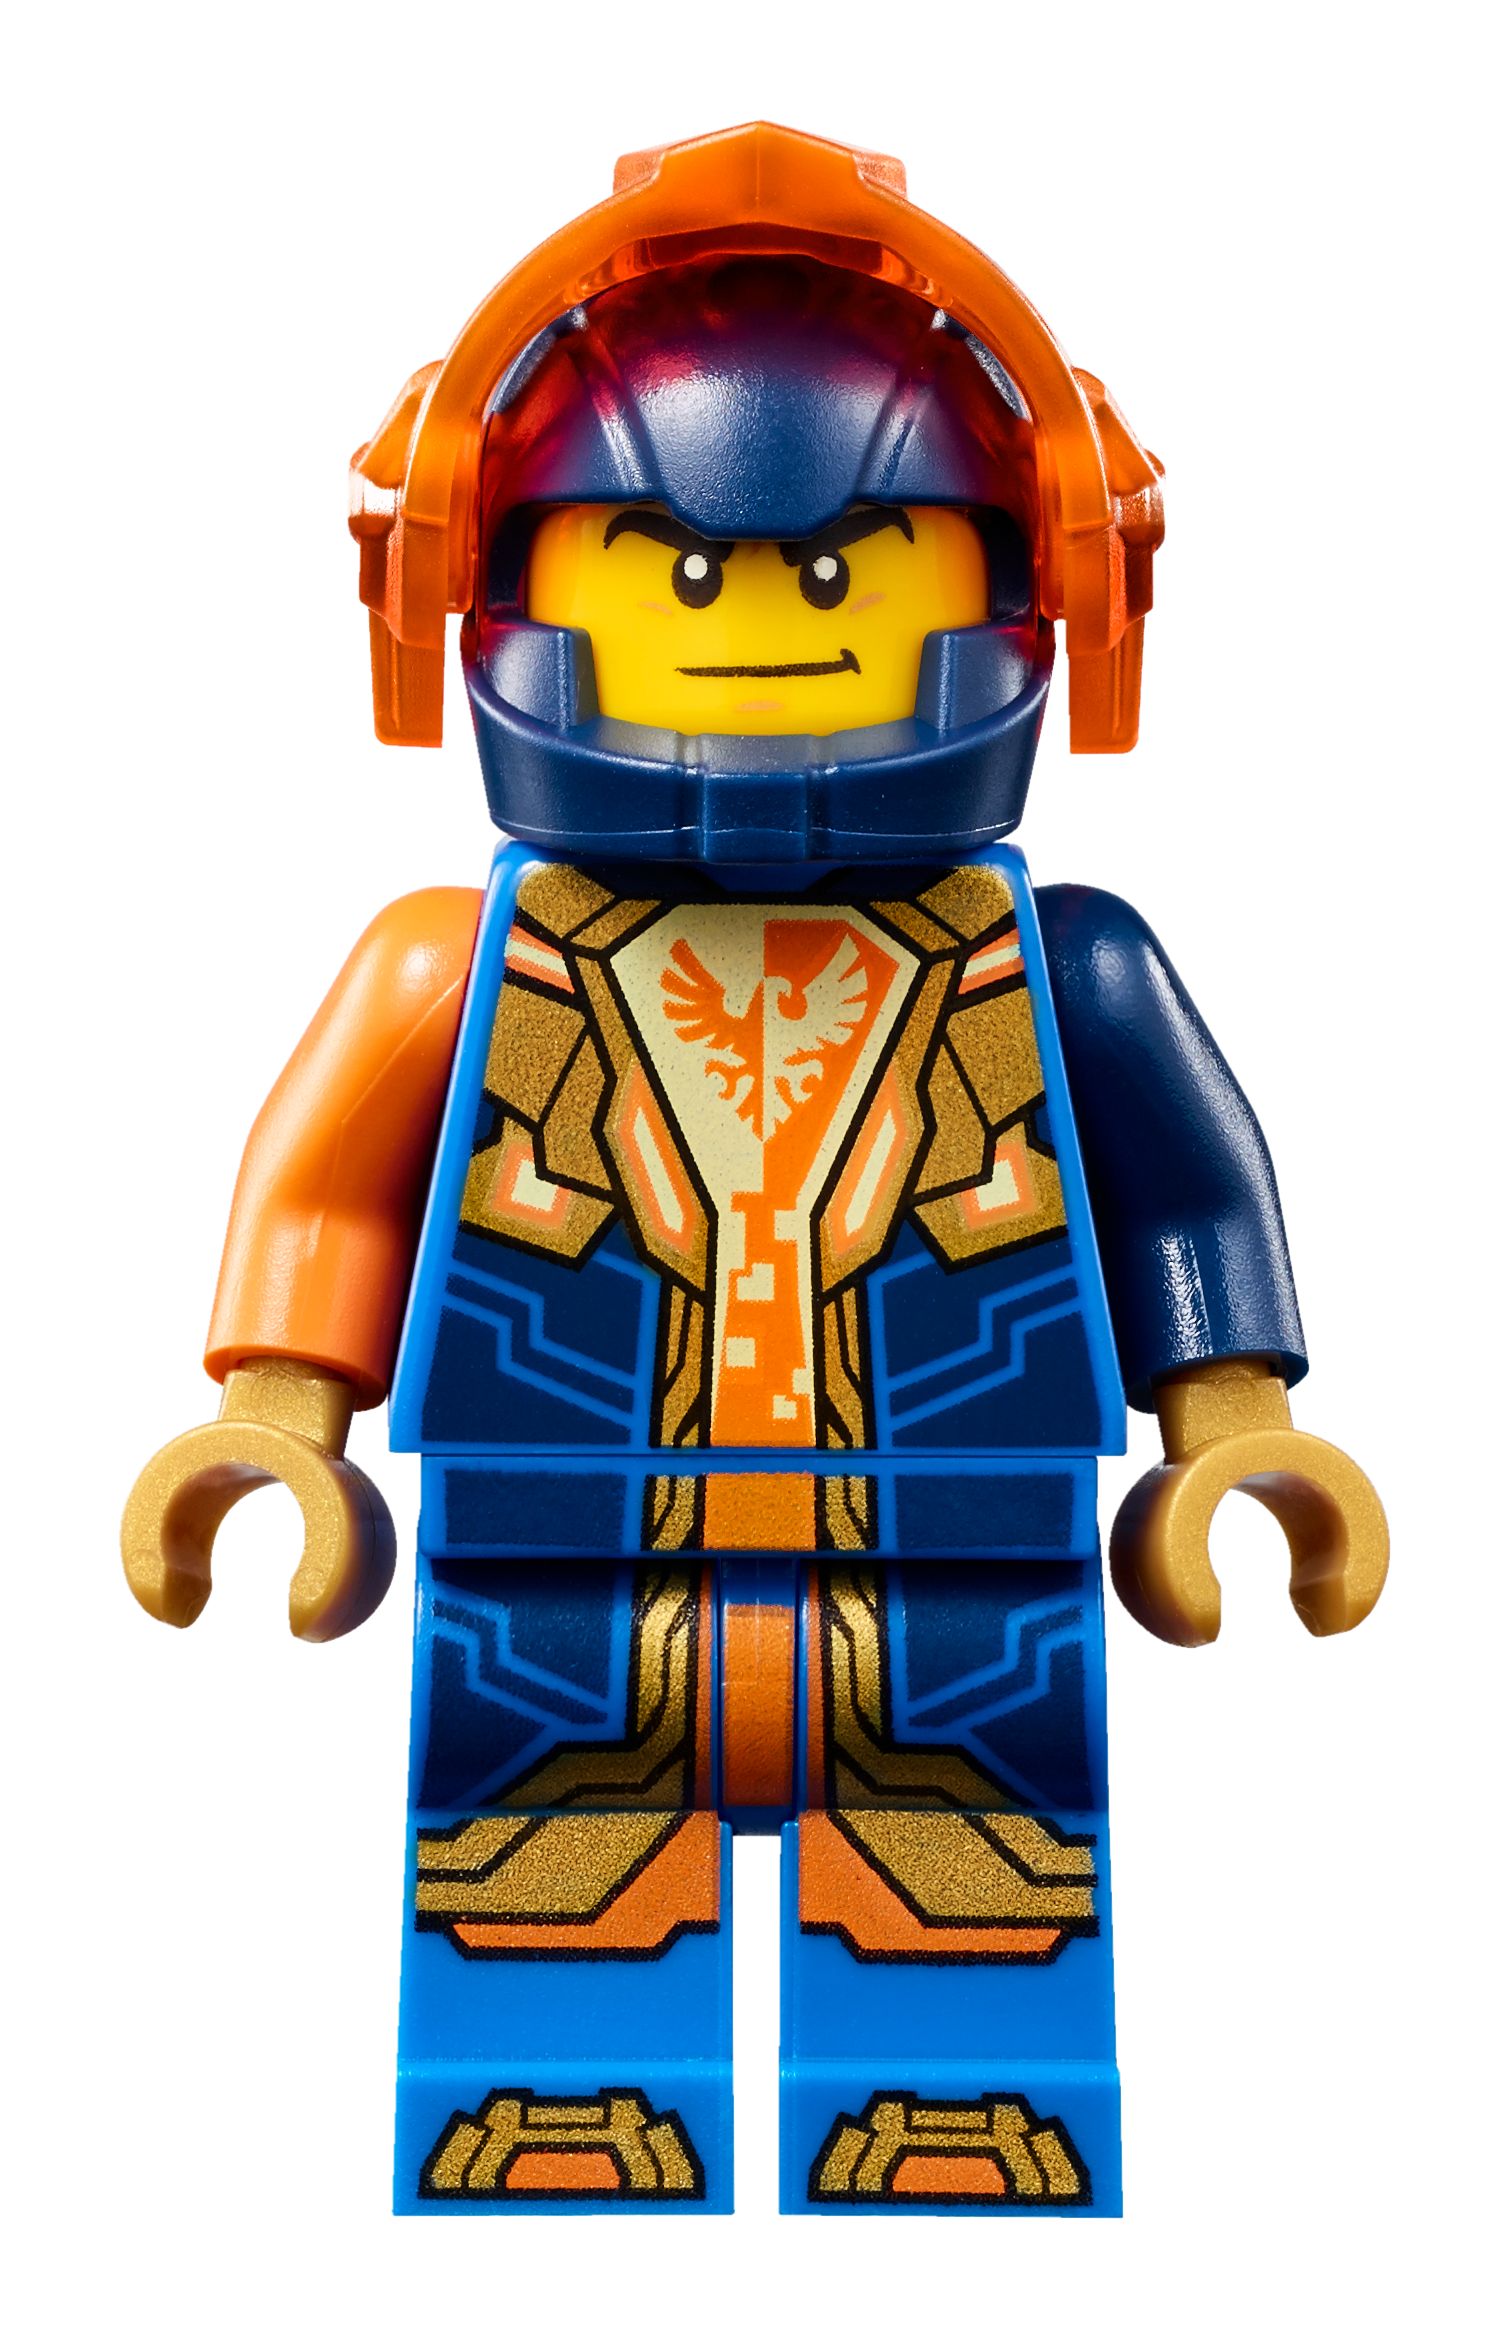 Clay - LEGO® NEXO KNIGHTS - Characters and Minifigures - LEGO.com US